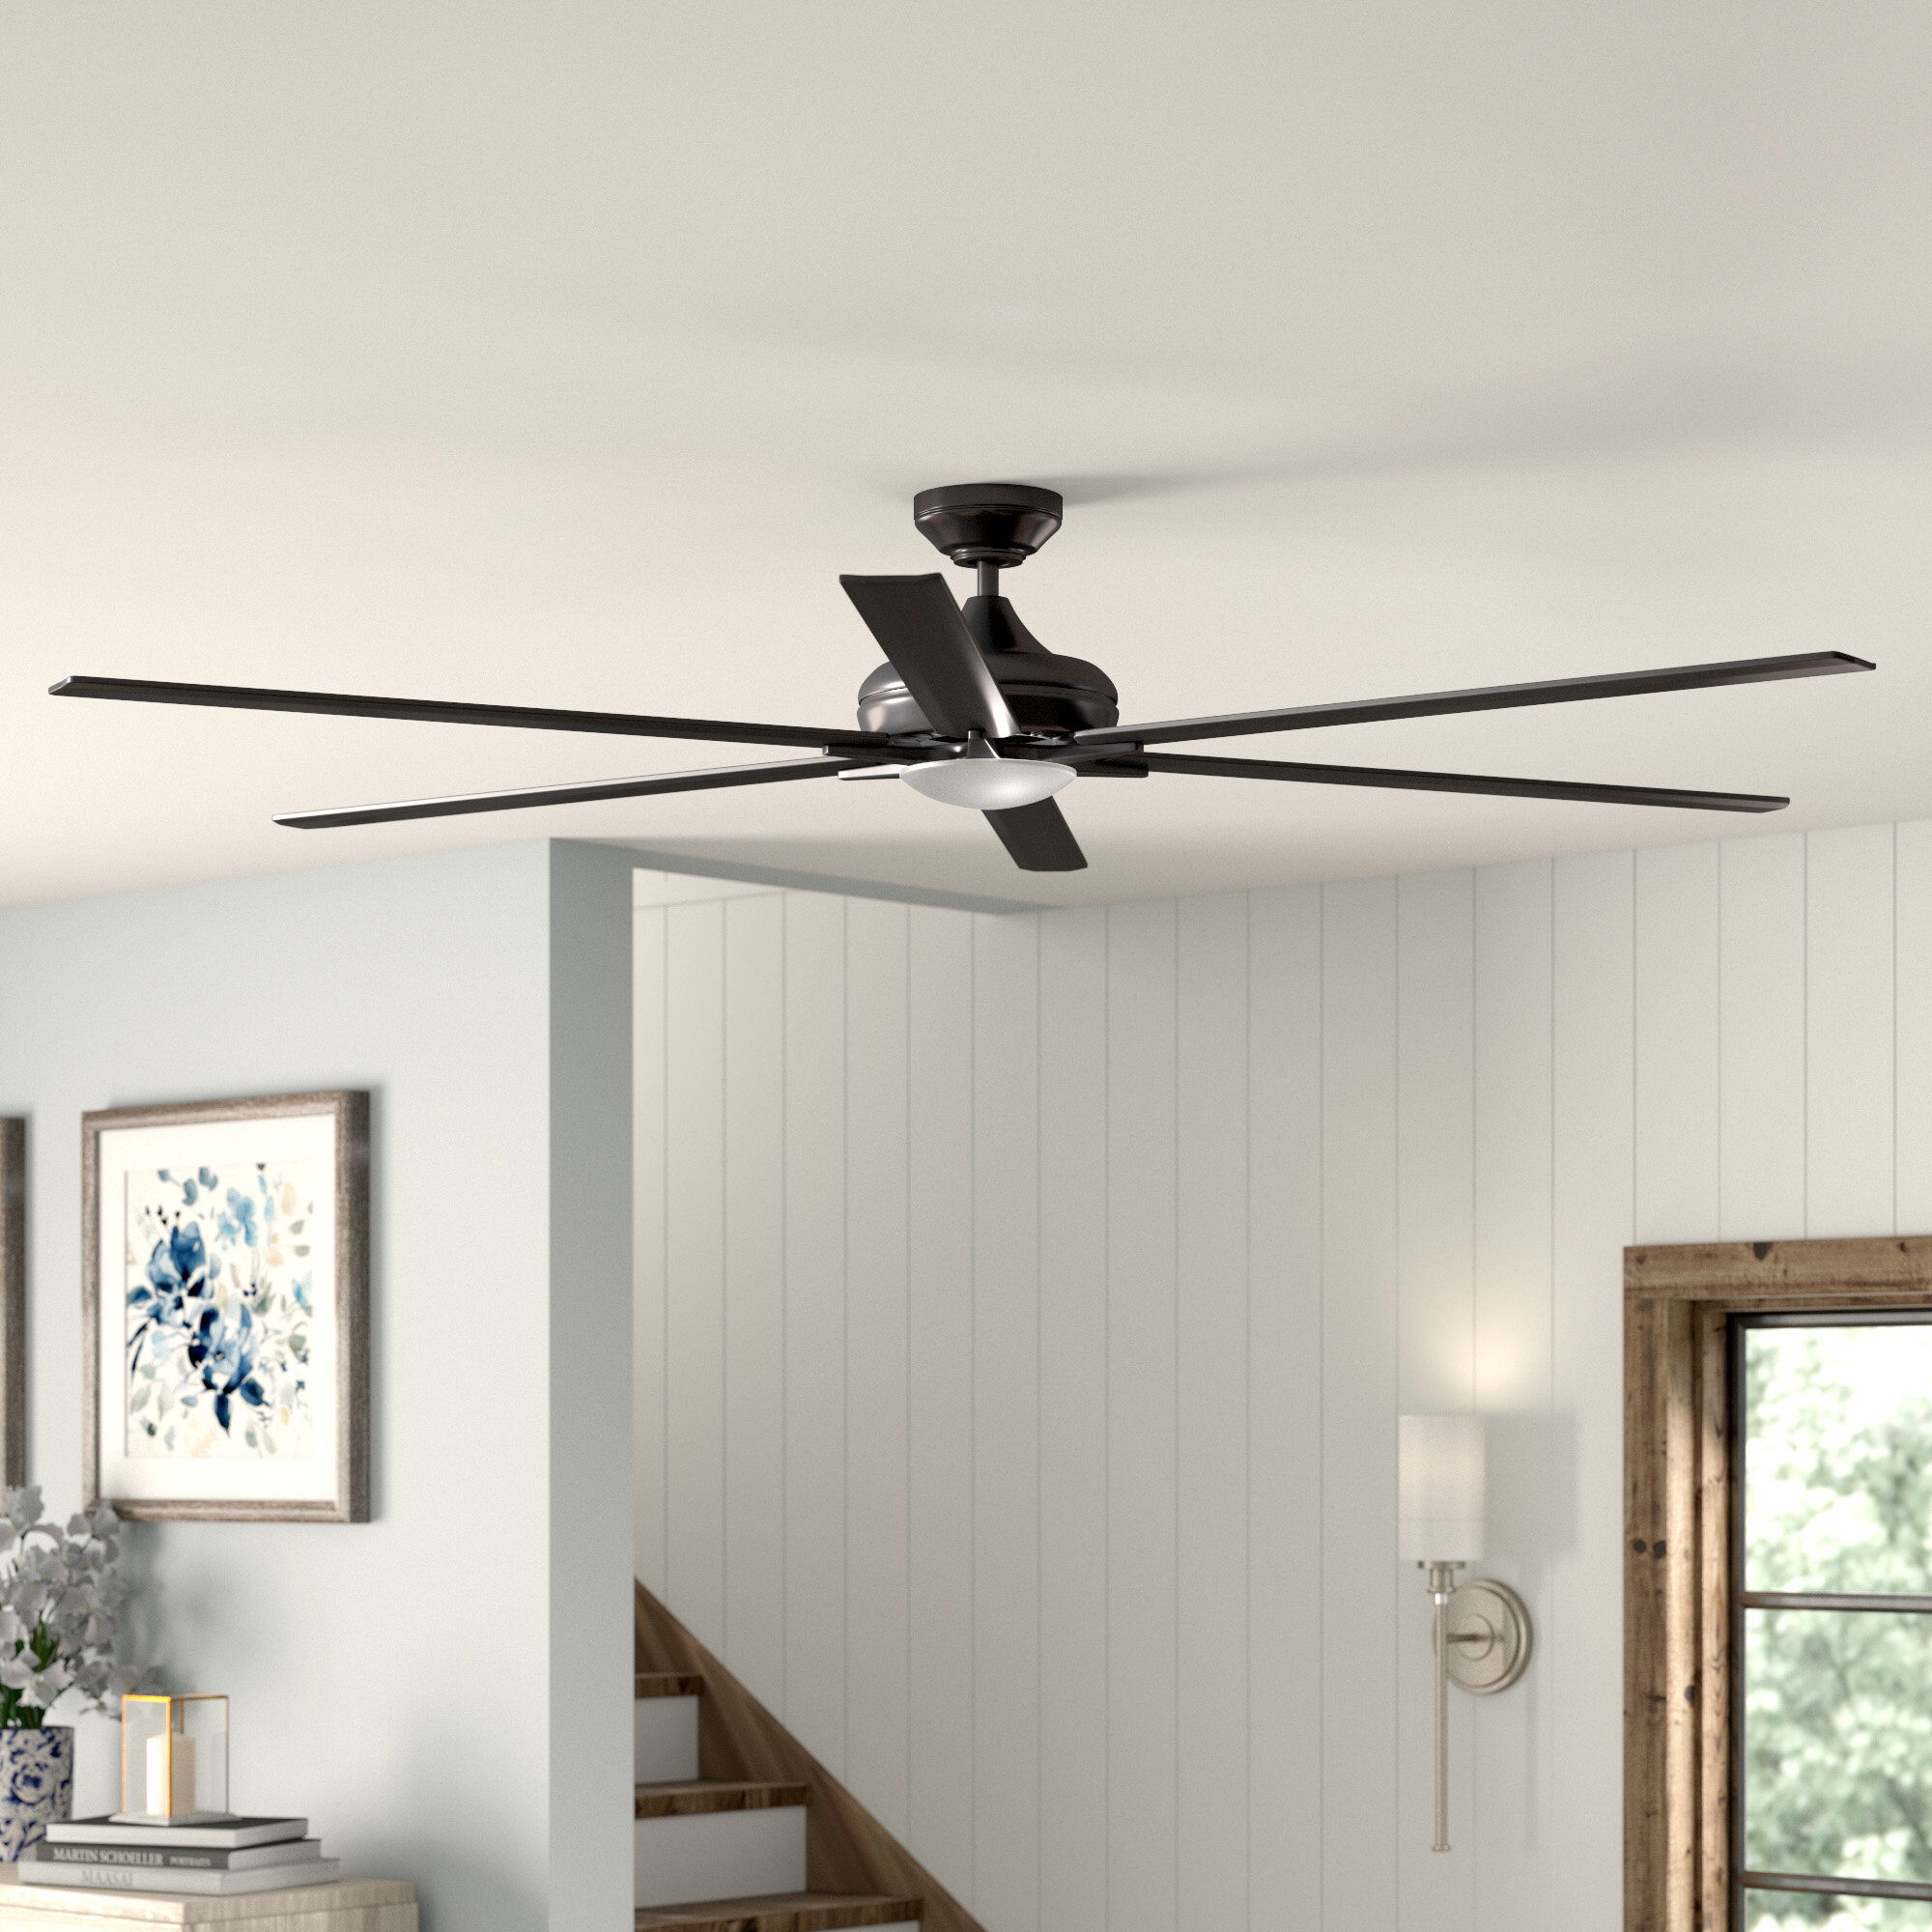 Darby Home Co 70 Ayling 6 Blade Ceiling Fan With Remote Light